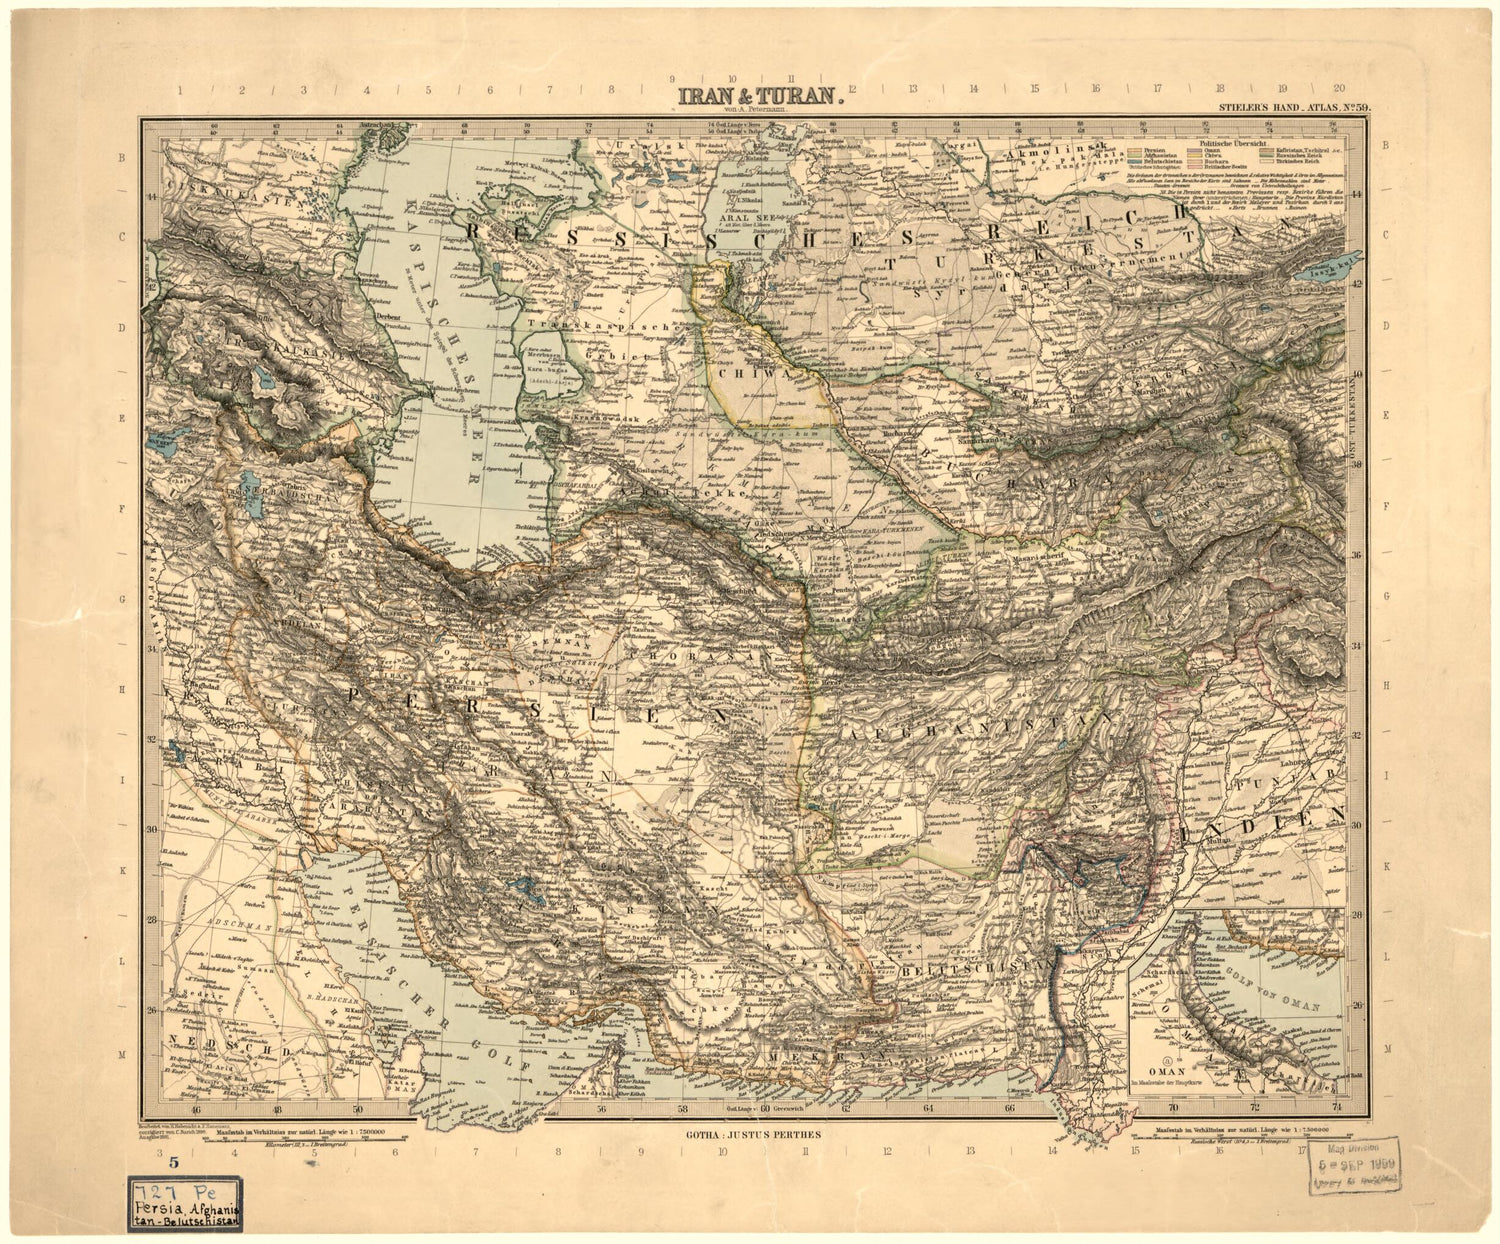 This old map of Iran &amp; Turan from 1891 was created by C. Barich, Hermann Habenicht, Germany) Justus Perthes (Firm : Gotha in 1891